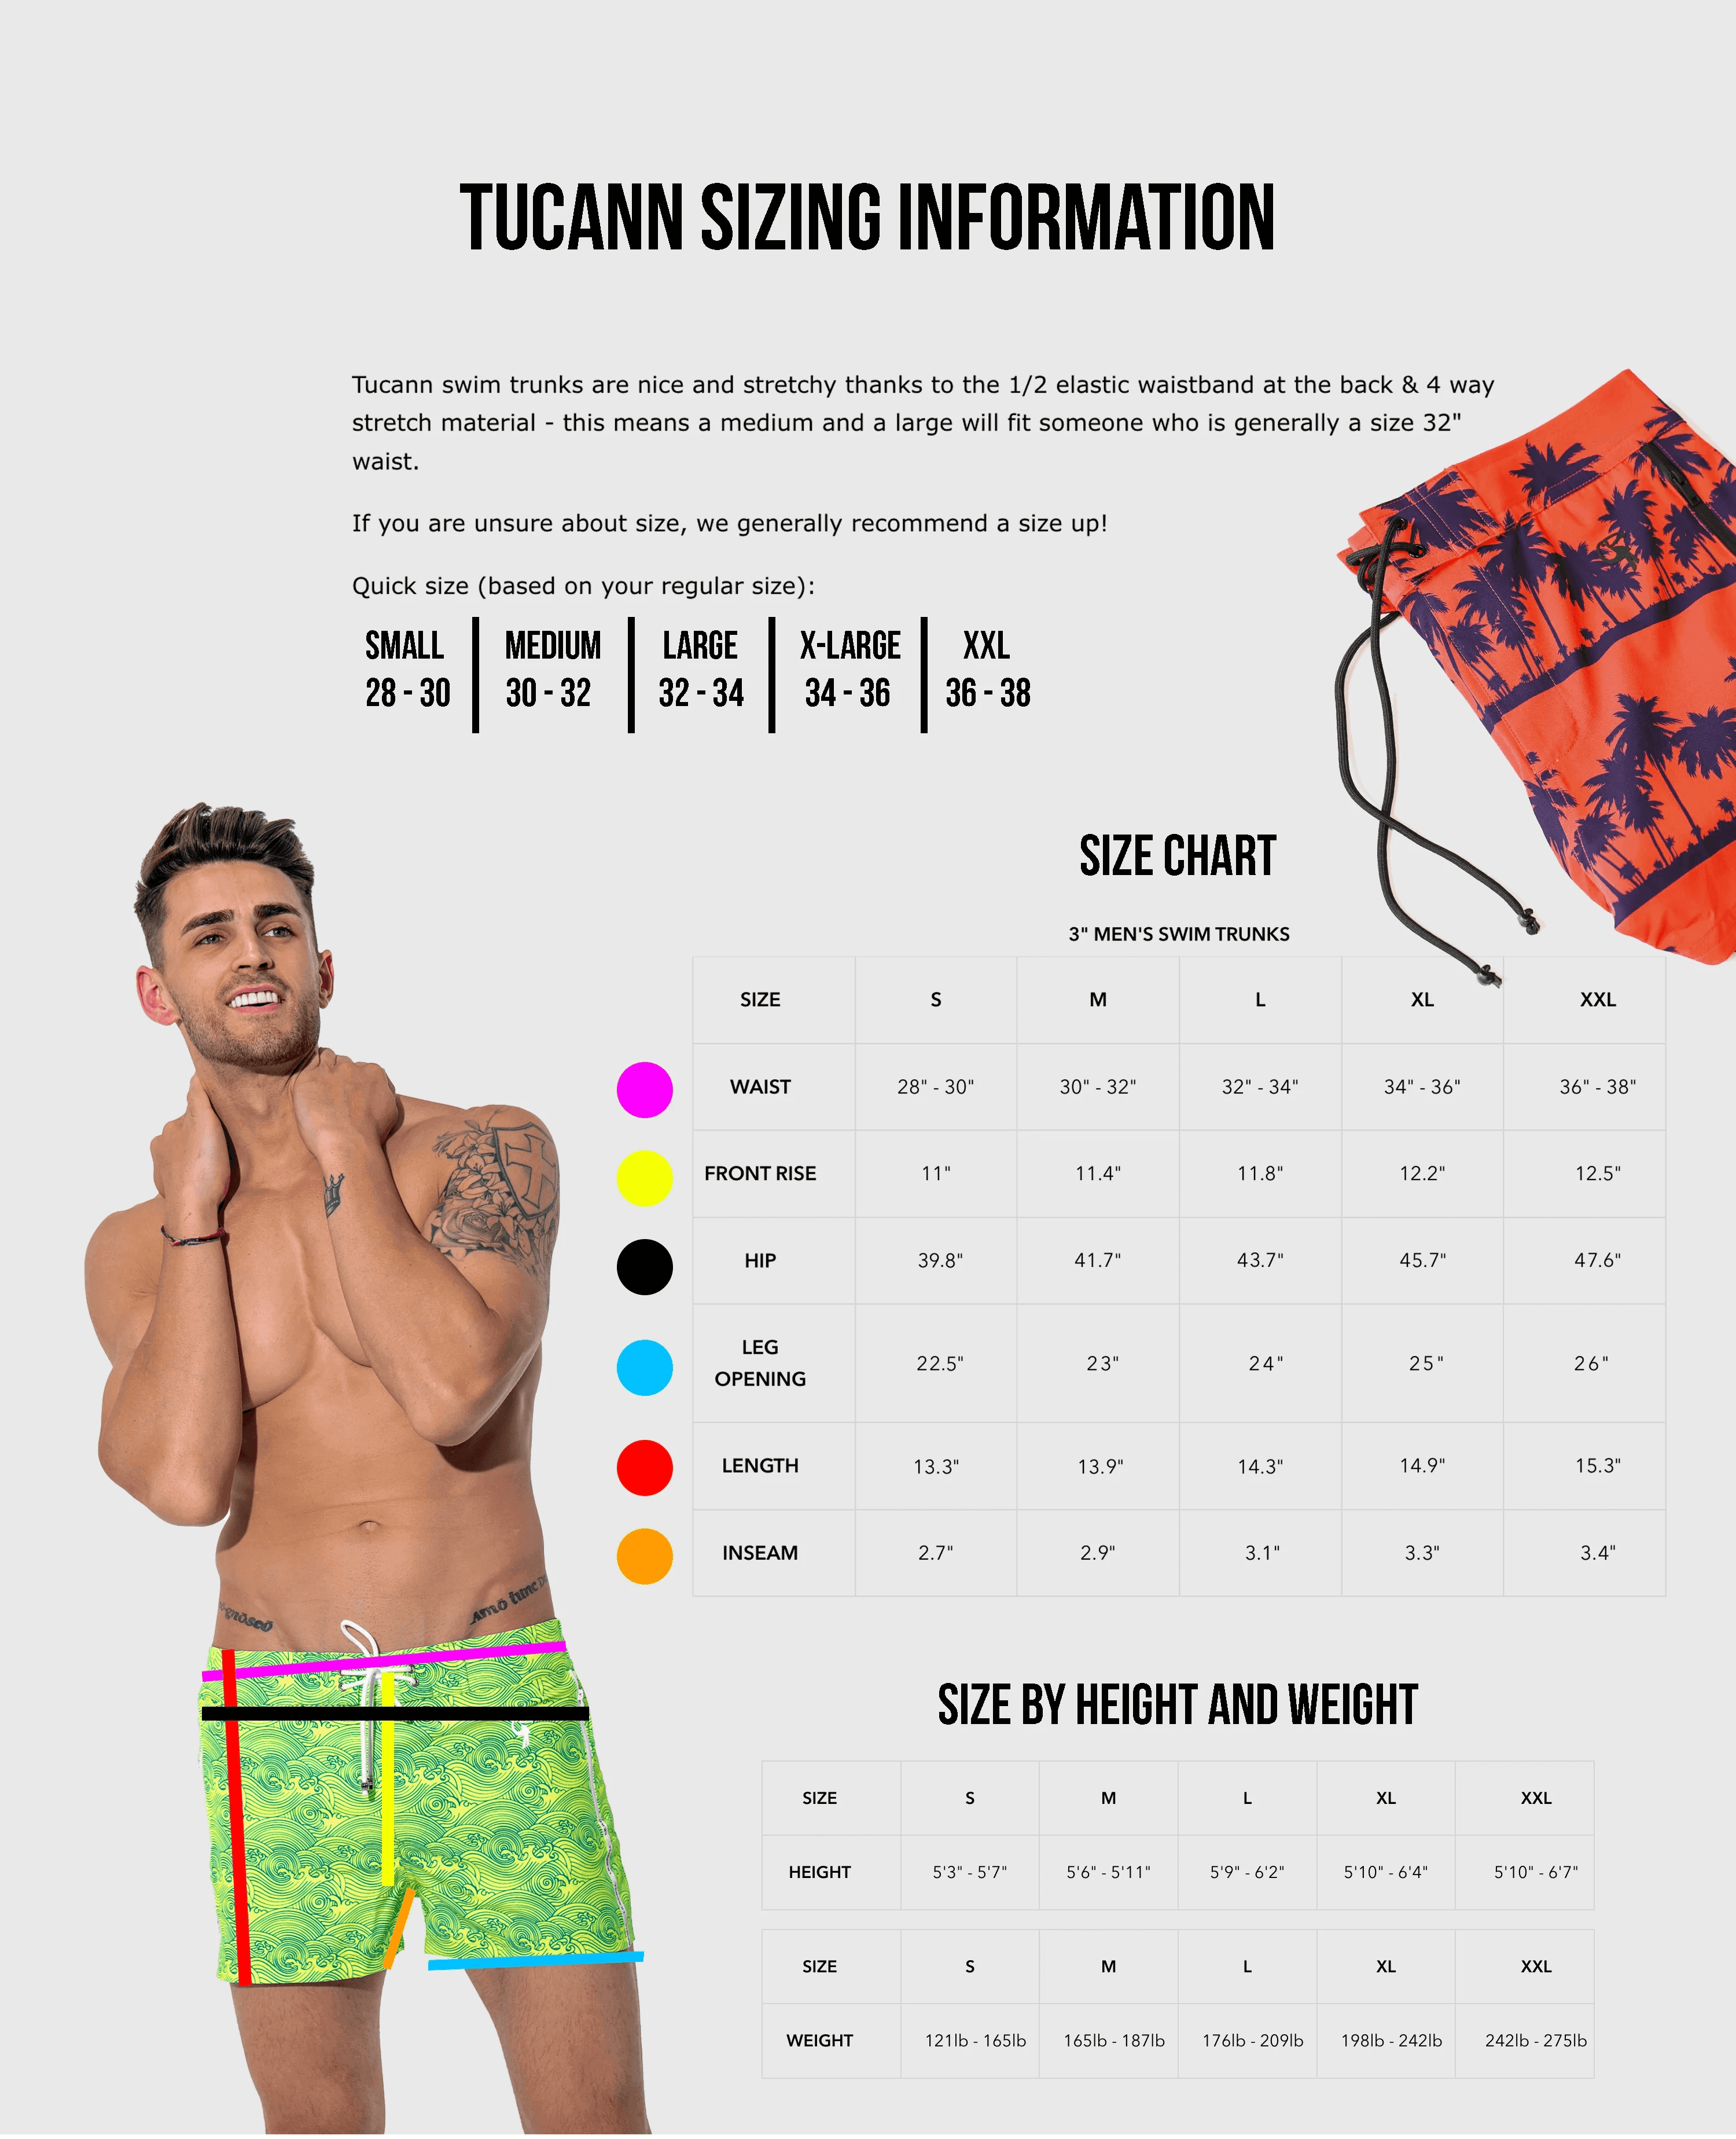 Men's Shorts Comparison and Sizing